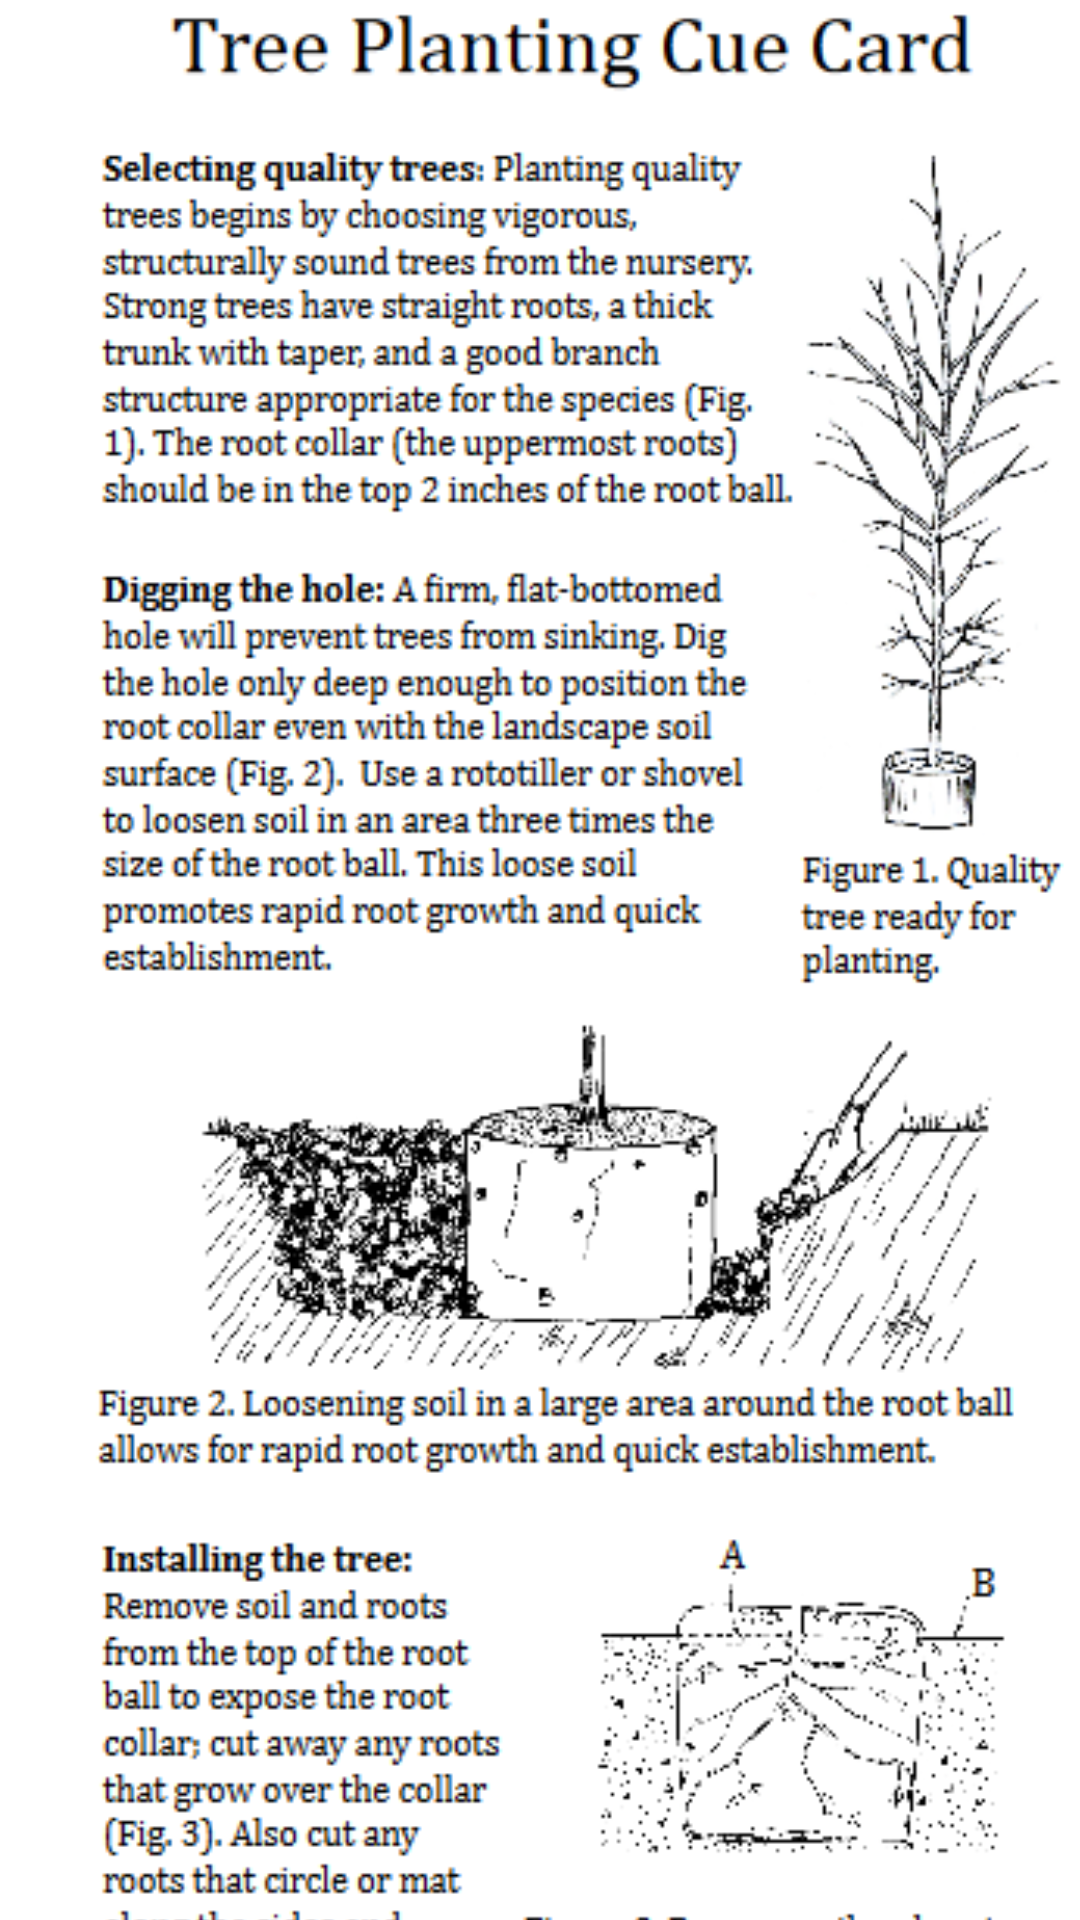 Tree Planting Cue Cards showing images of the quality of tree to purchase and plant based on tree branches and other features